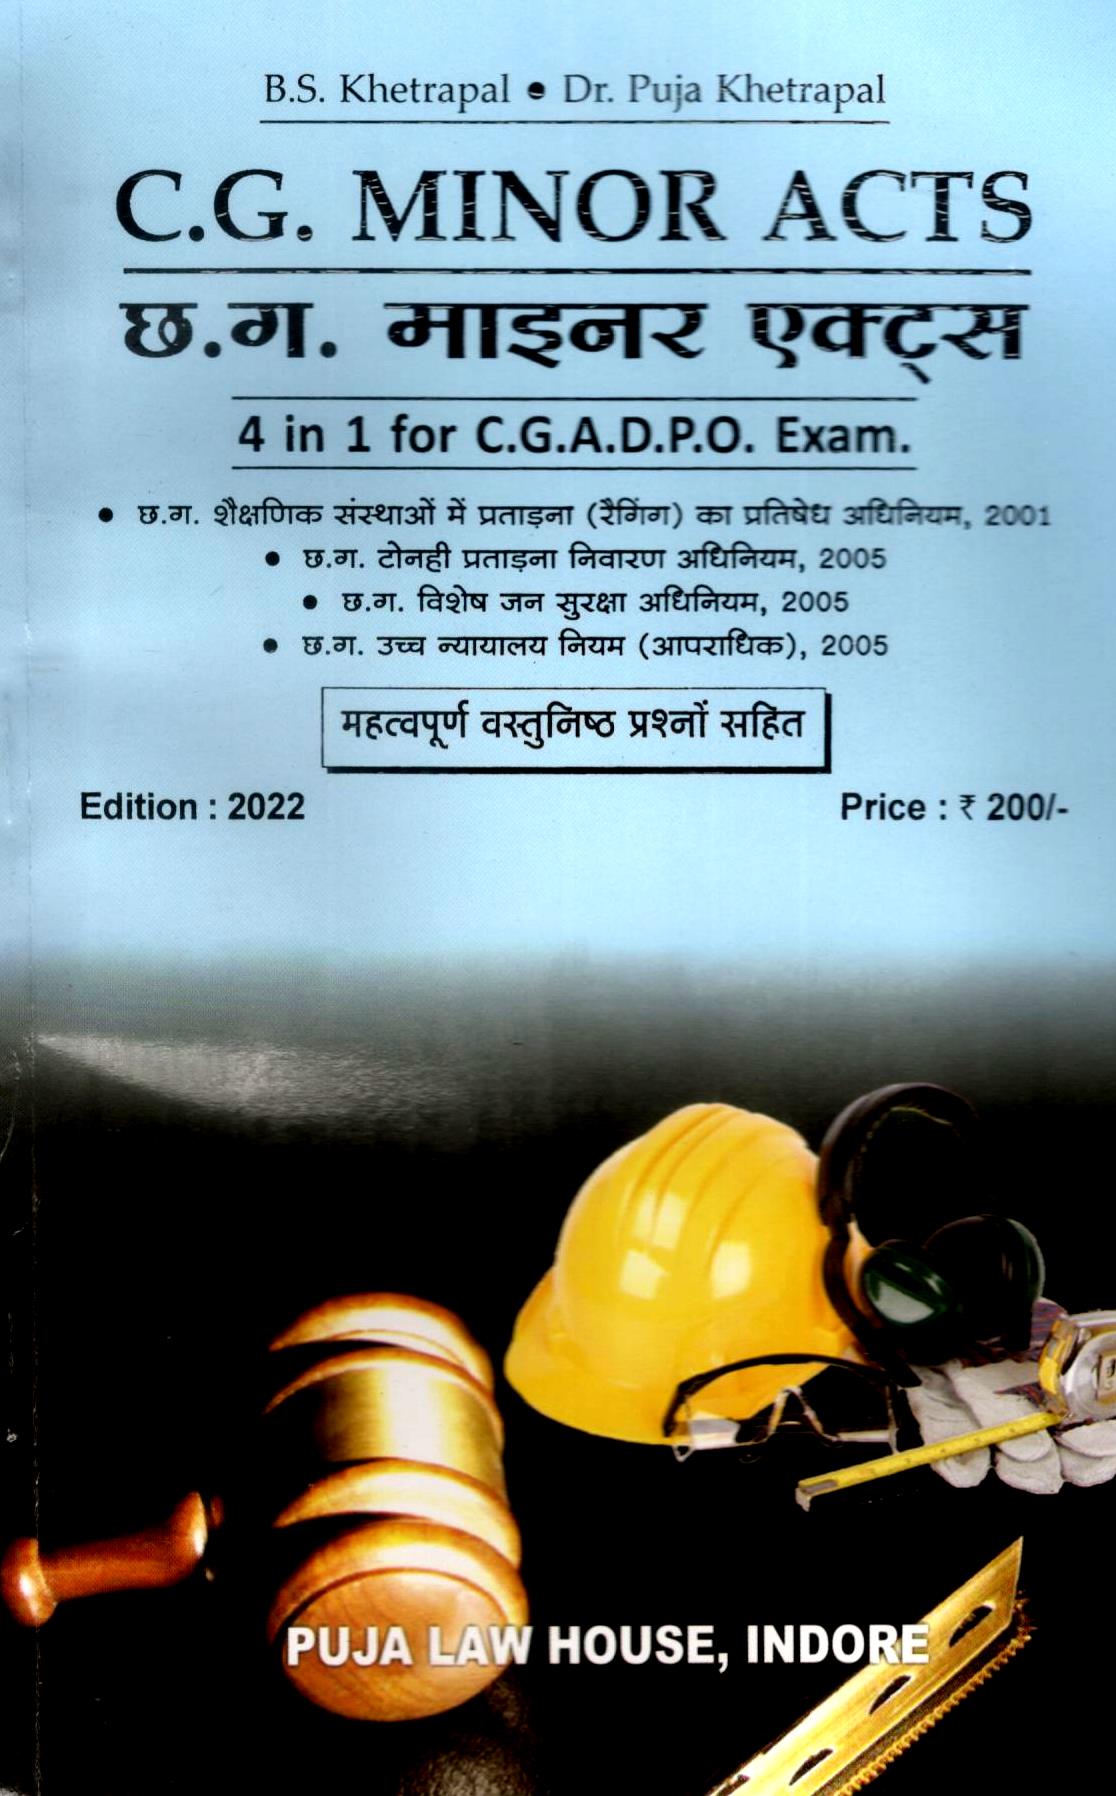  Buy C.G. Minor Acts / छ.ग. माइनर एक्ट्स - 4 in 1 for C.G.A.D.P.O. Exam.